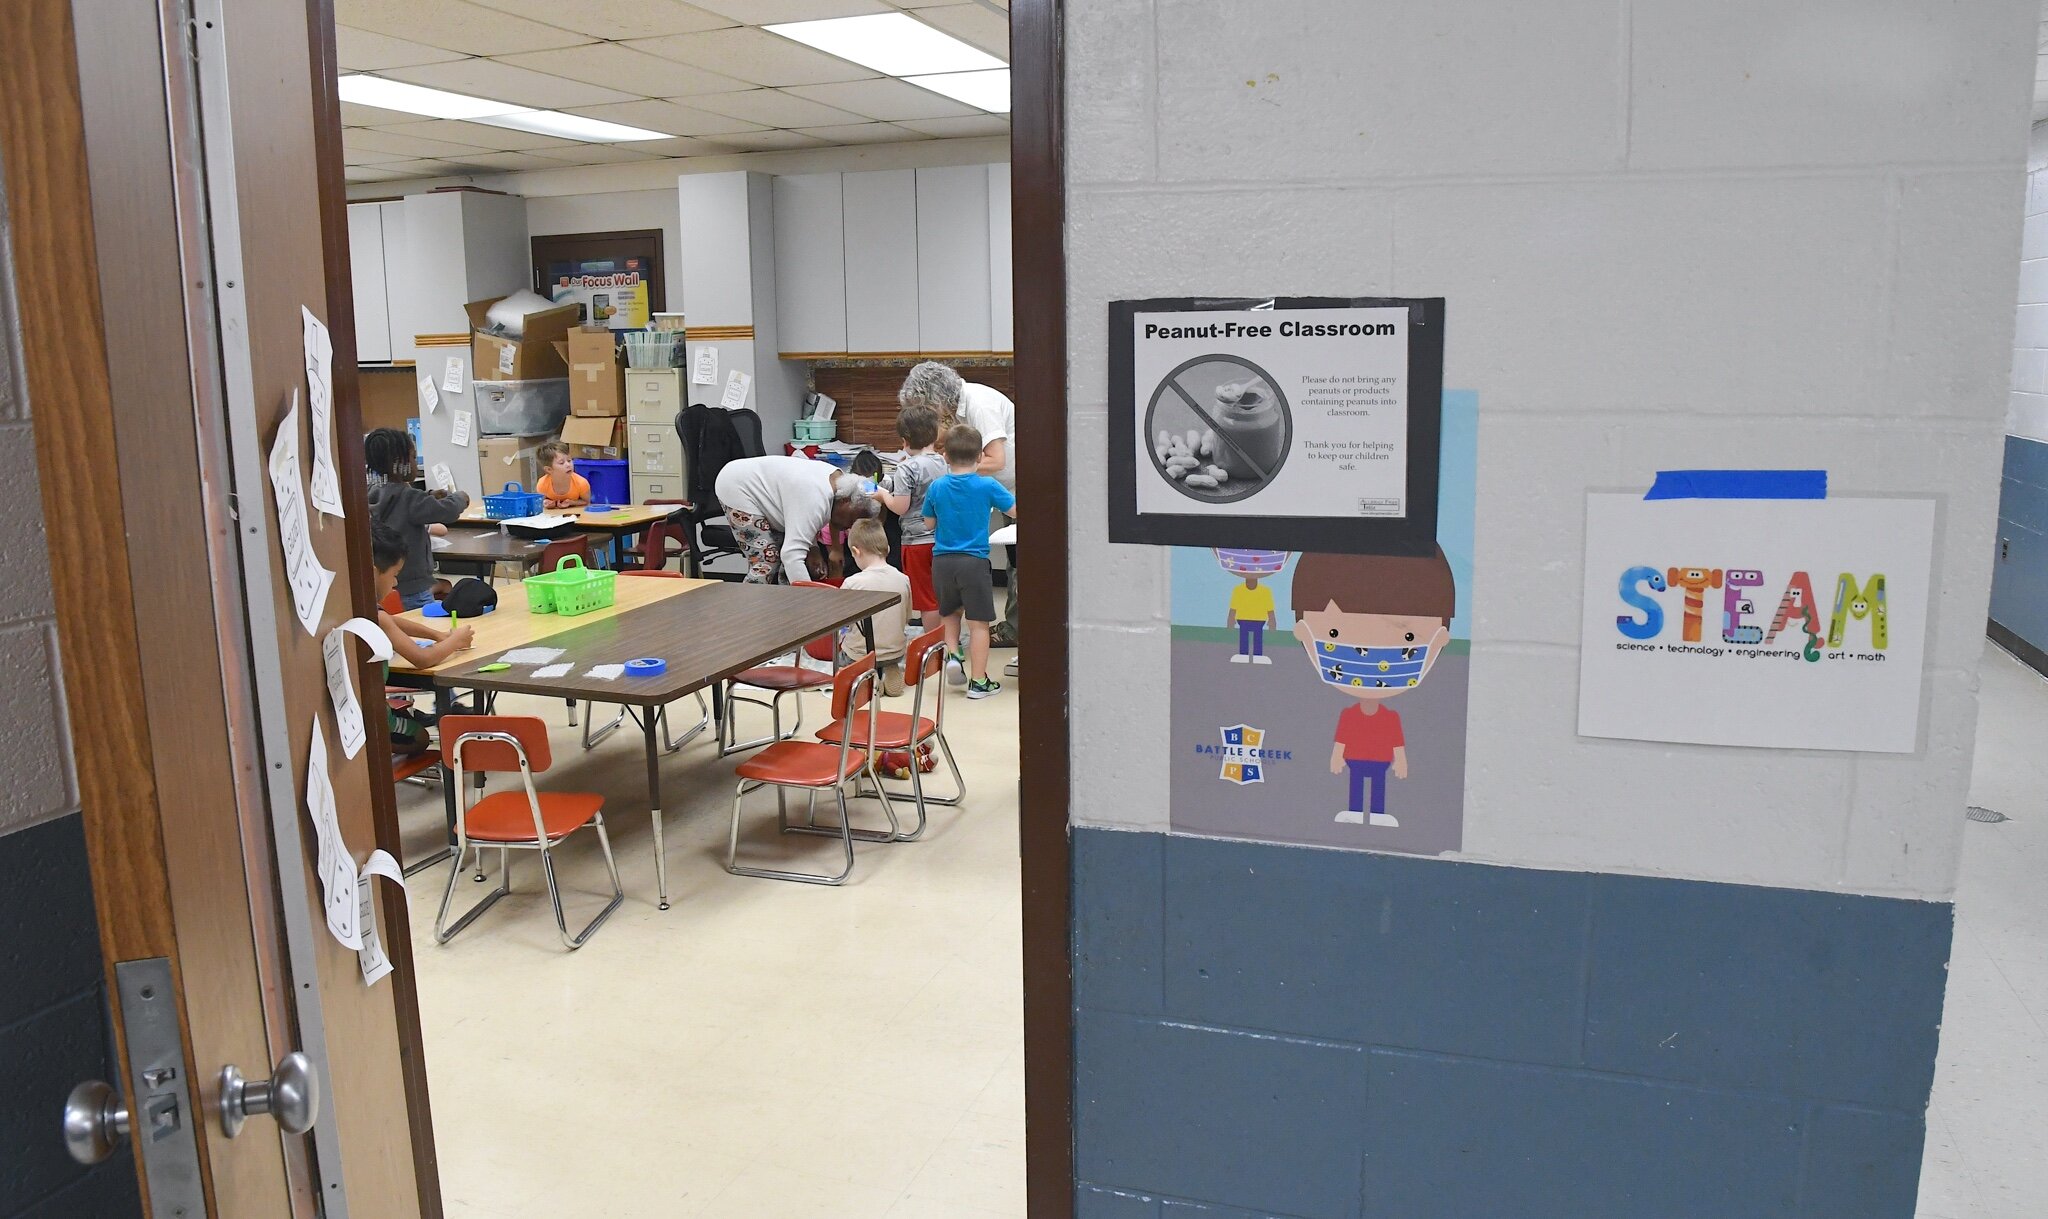 Students work in Susan Goin's STEAM classroom during a morning session at Franklin- Post Elementary School.